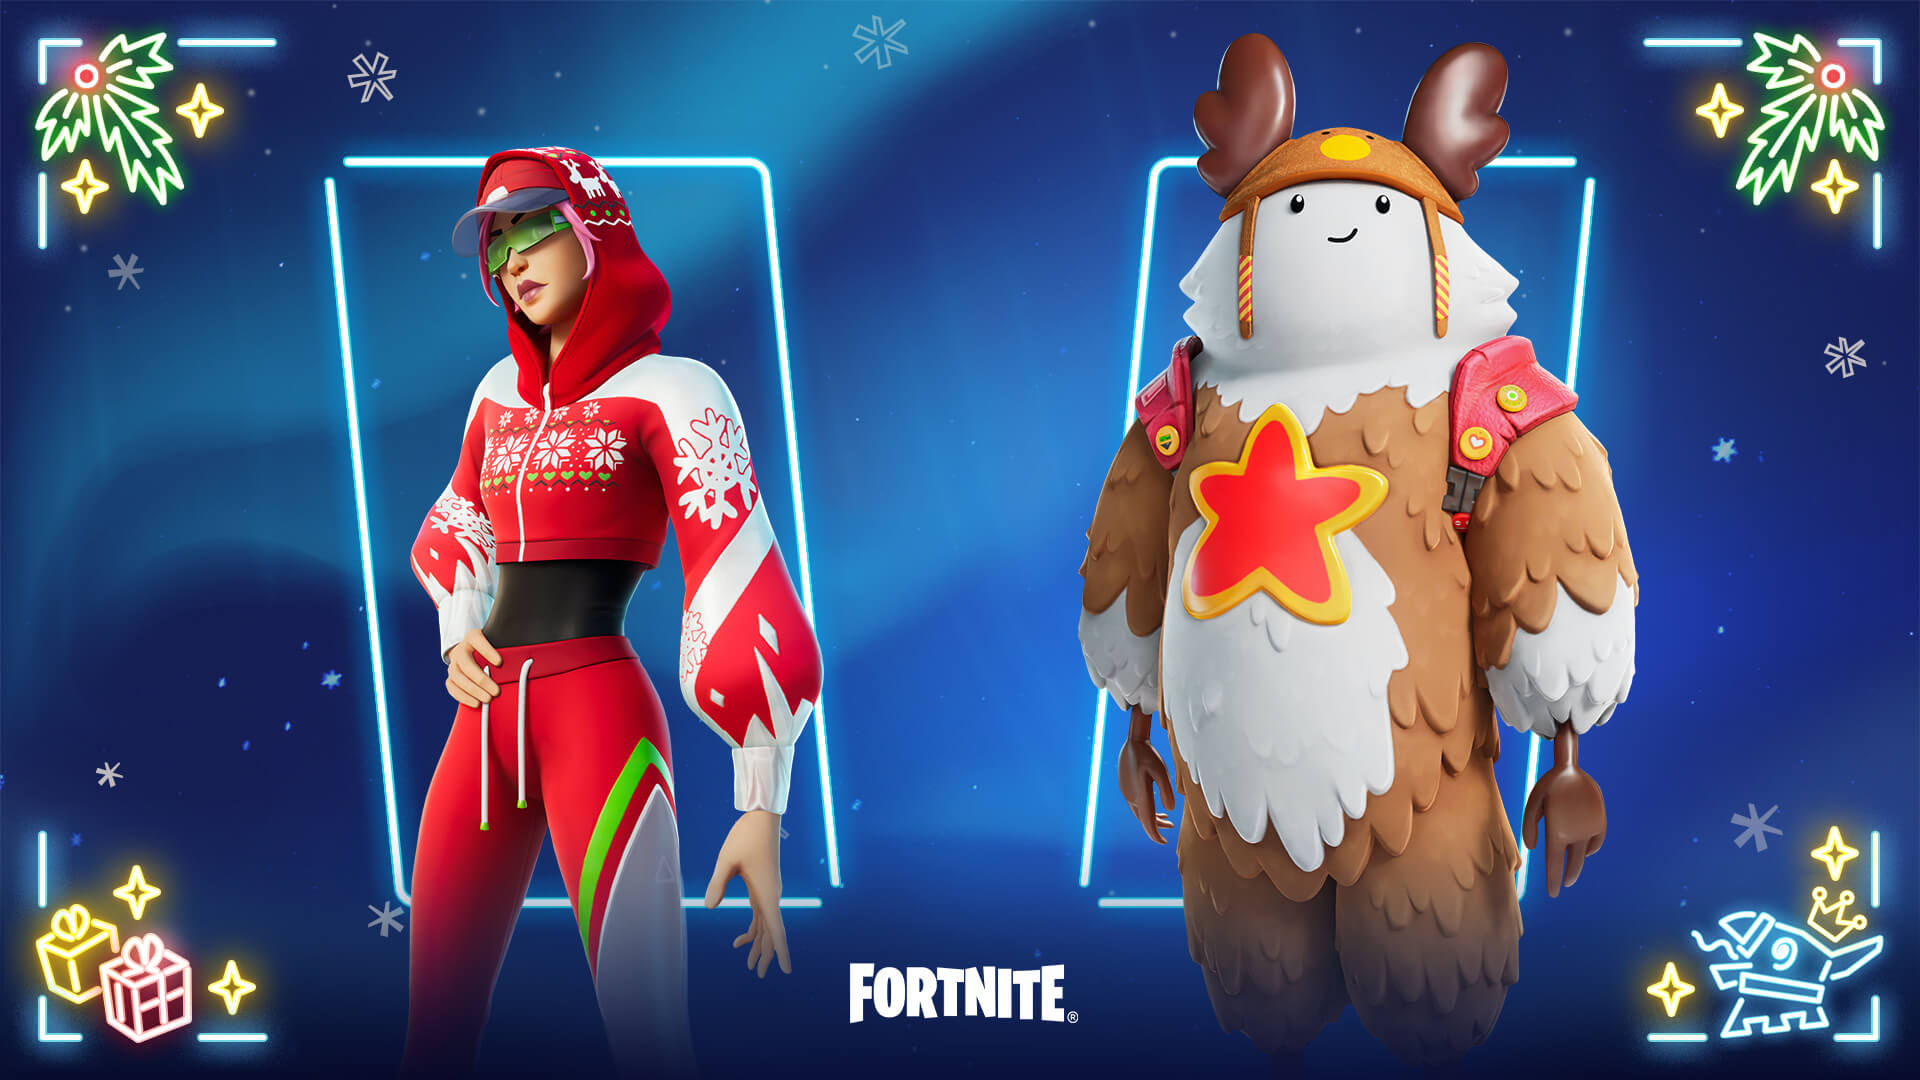 Patch Notes for Fortnite v23.10 - Winterfest, Super Level Styles and more